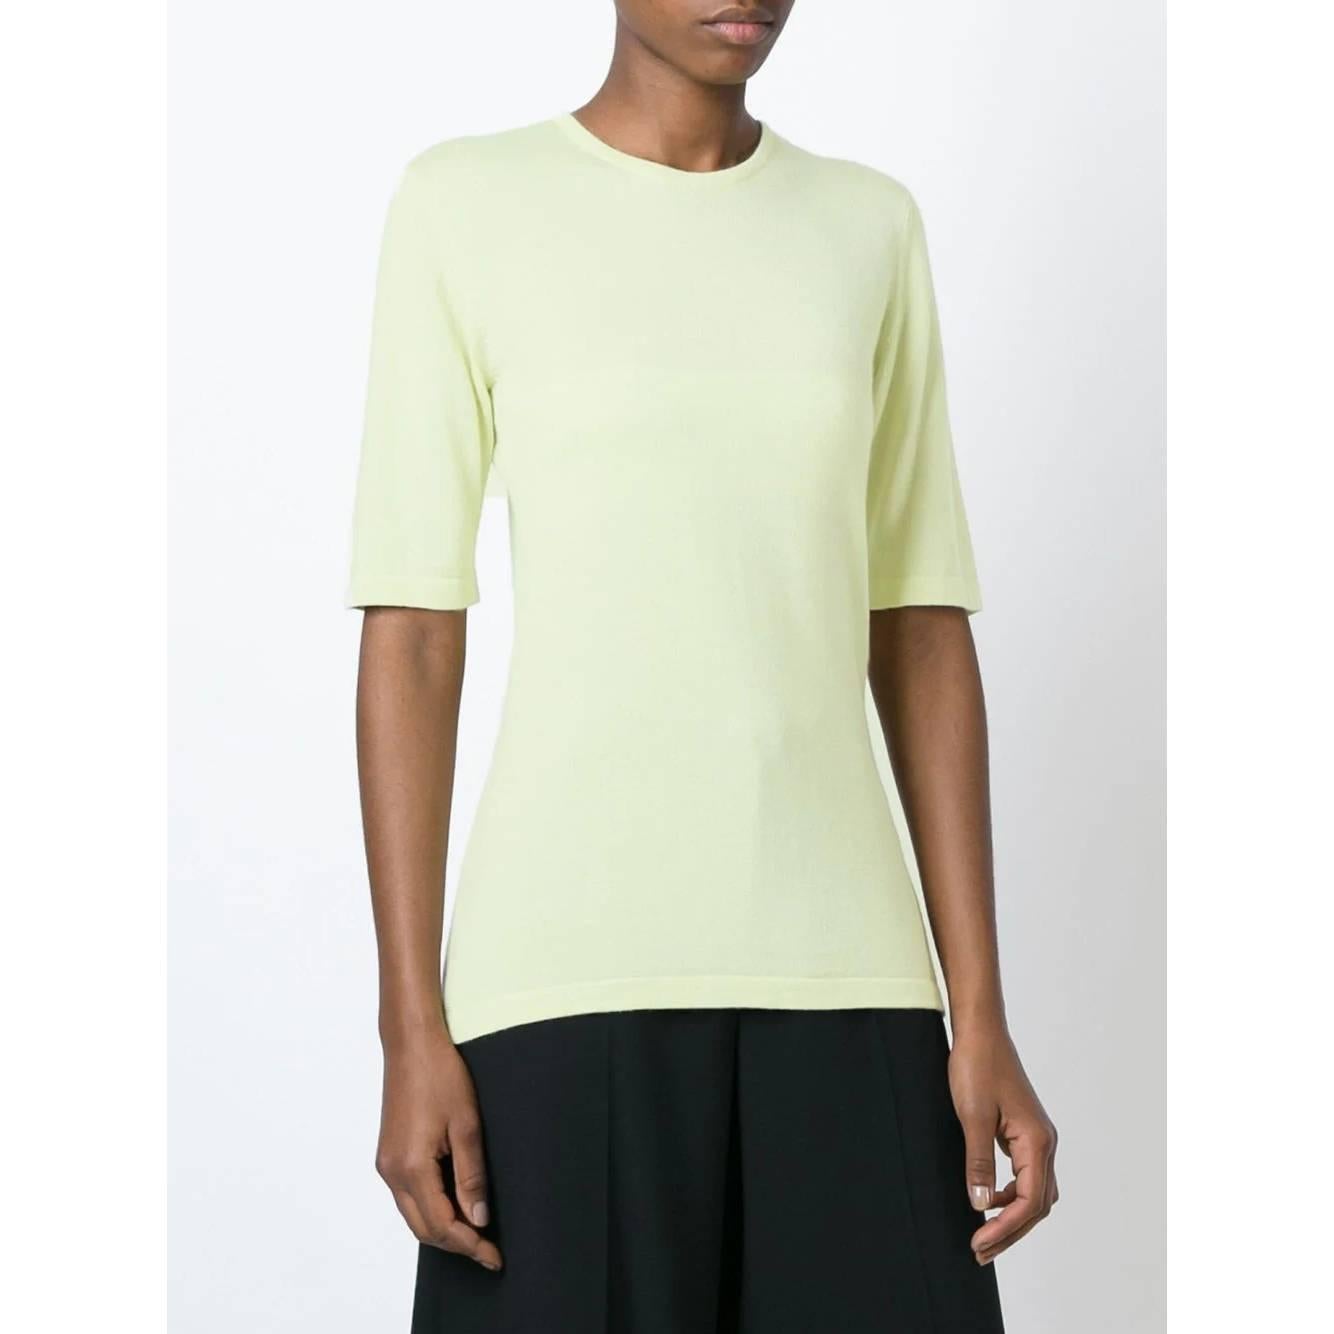 Céline mint green cashmere and silk blend sweater. Round neck and short sleeves. 

Years: 90s

Made in Italy

Size: 3


Flat measurements

Height: 67 cm
Shoulders: 38 cm 
Bust: 42 cm
Sleeves: 31 cm